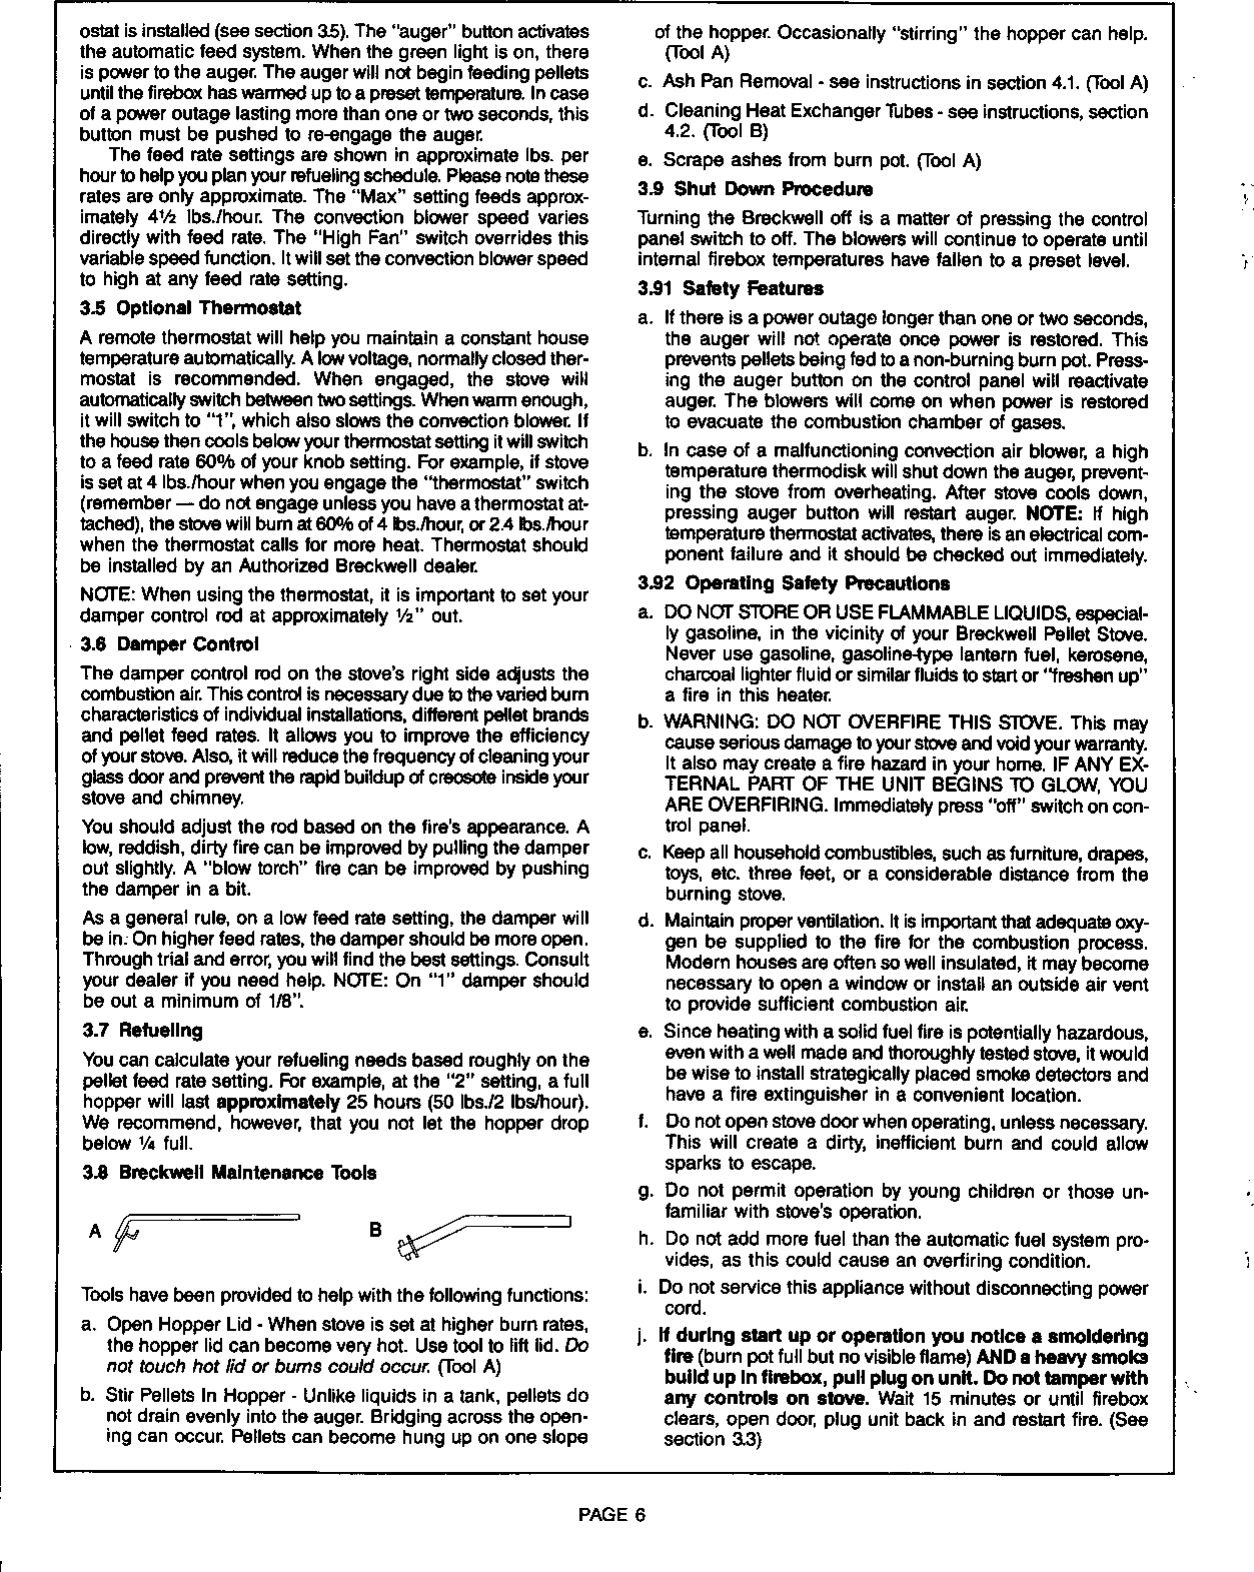 Page 6 of 9 - Breckwell Breckwell-1991-s-P24Fs-Users-Manual- P24 Blazer Pellet Stove Owner's Manual  Breckwell-1991-s-p24fs-users-manual